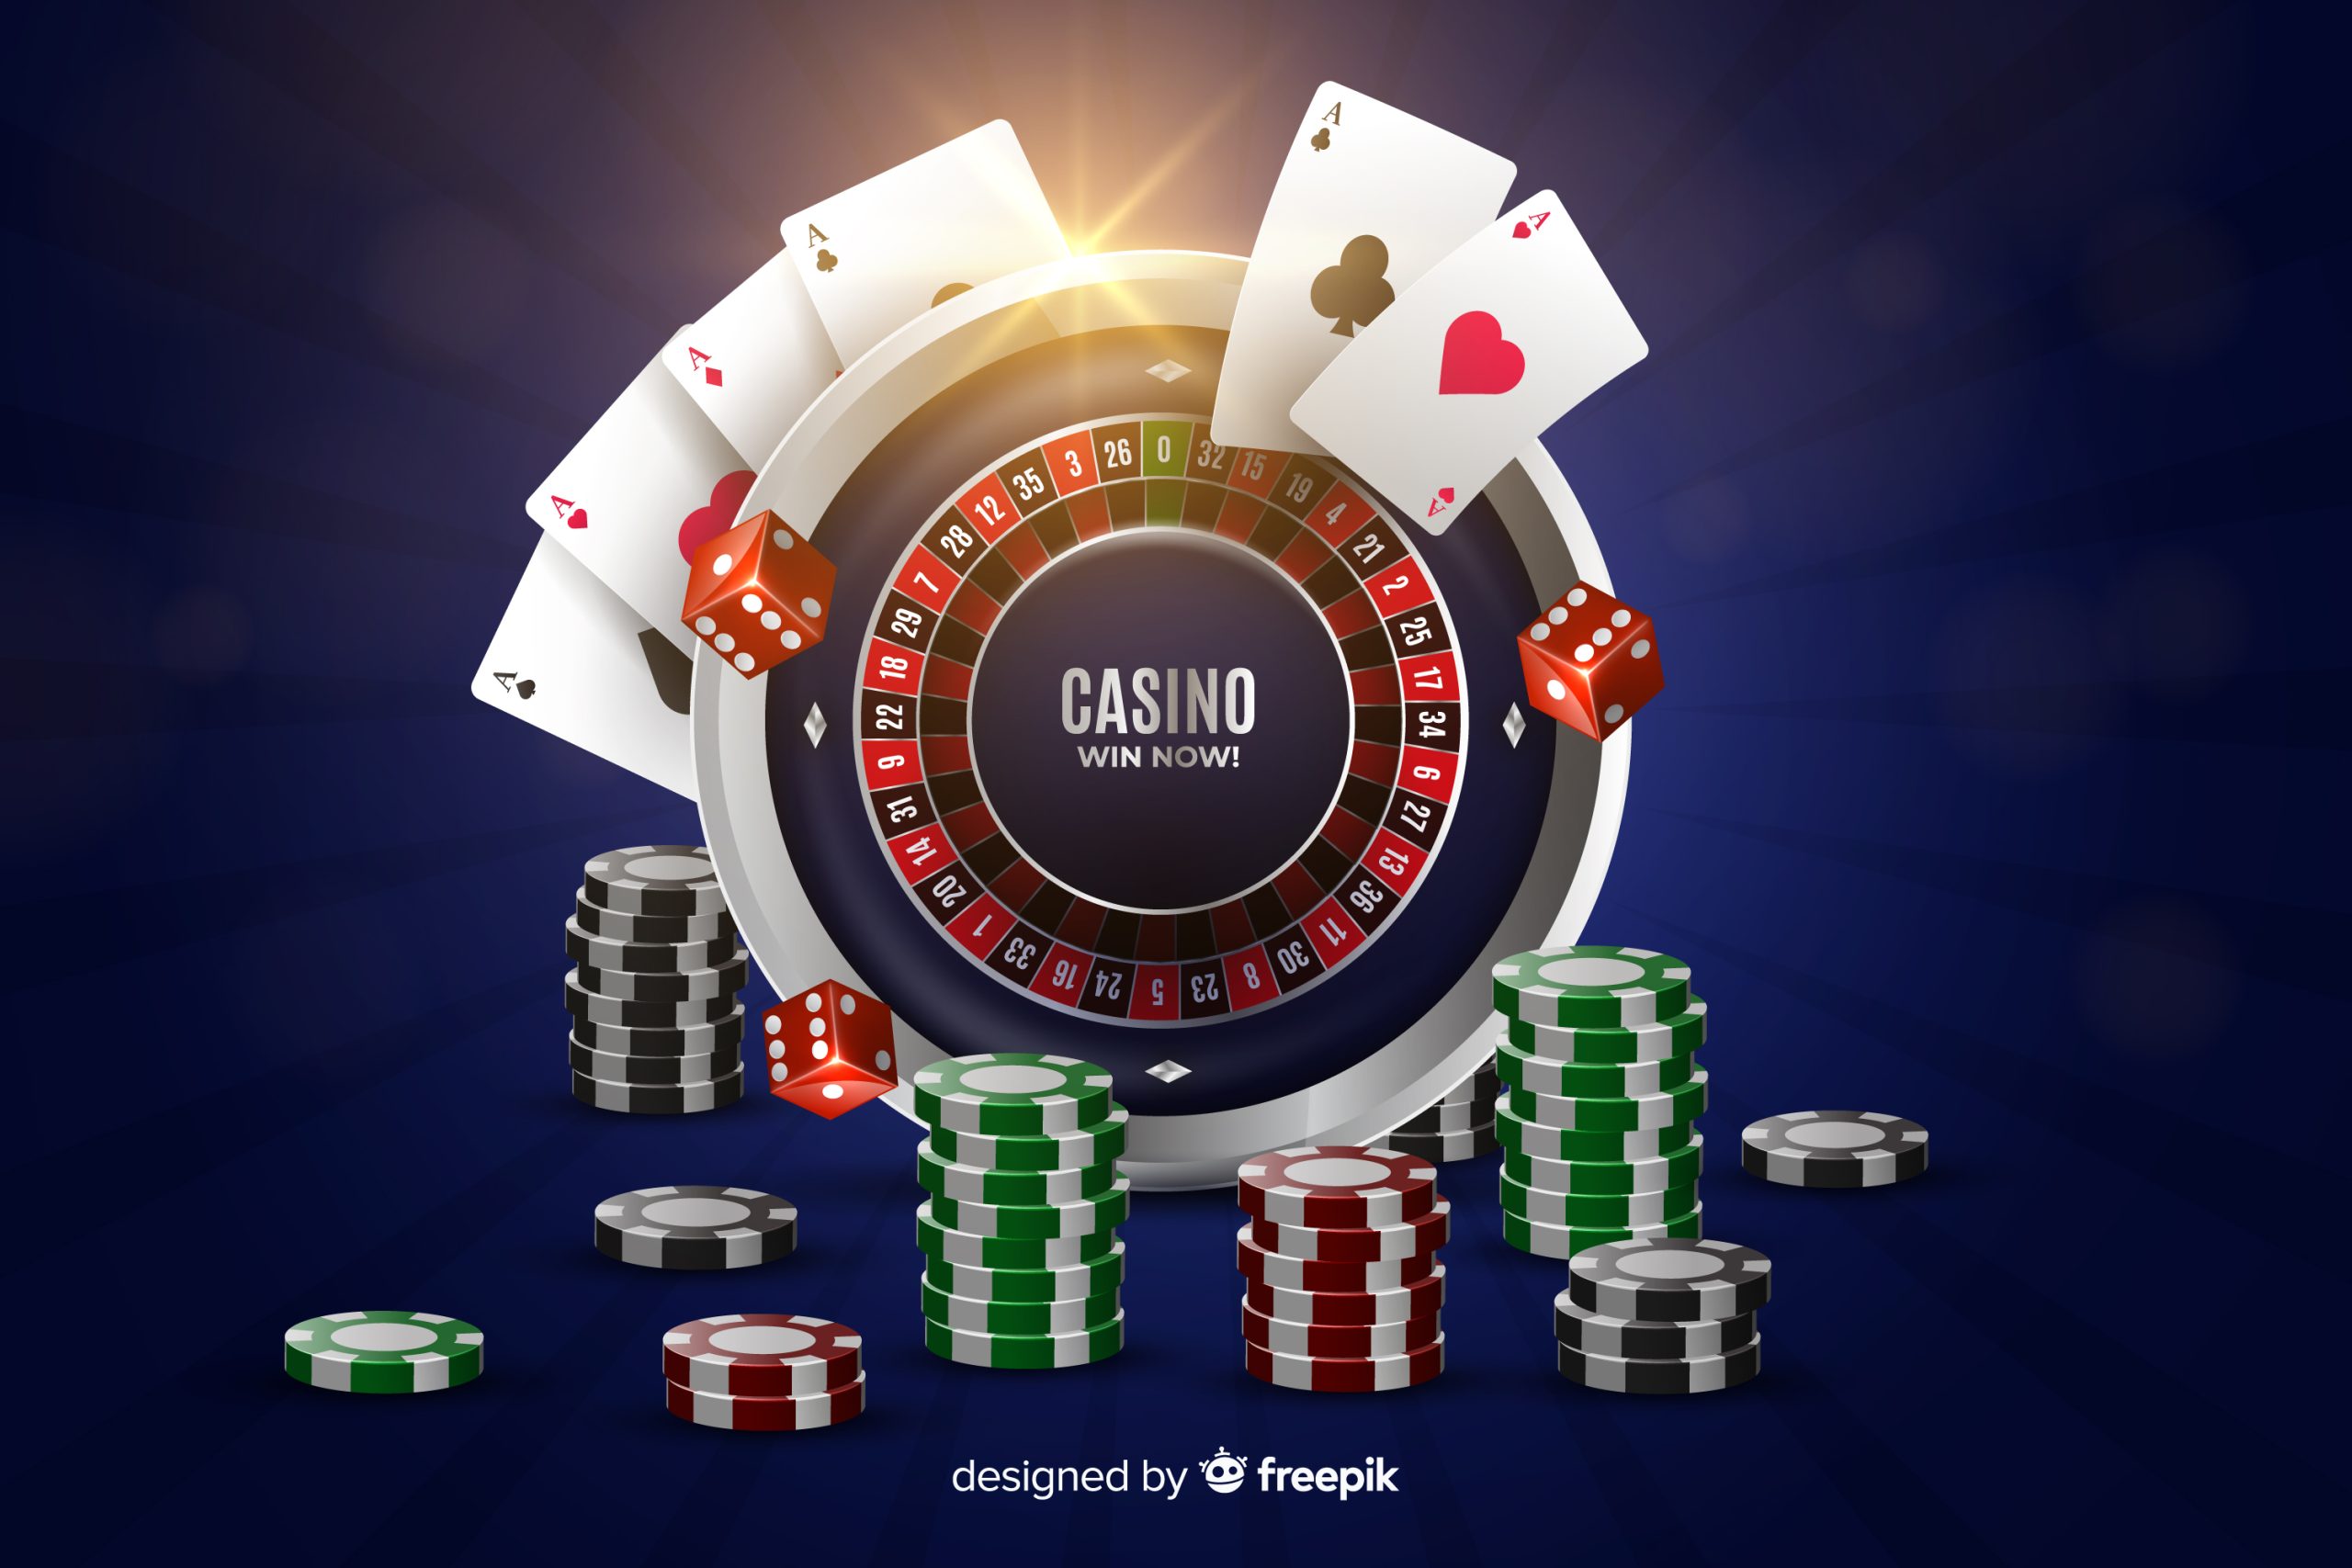 Beyond the basics: popular online casino games that are thriving